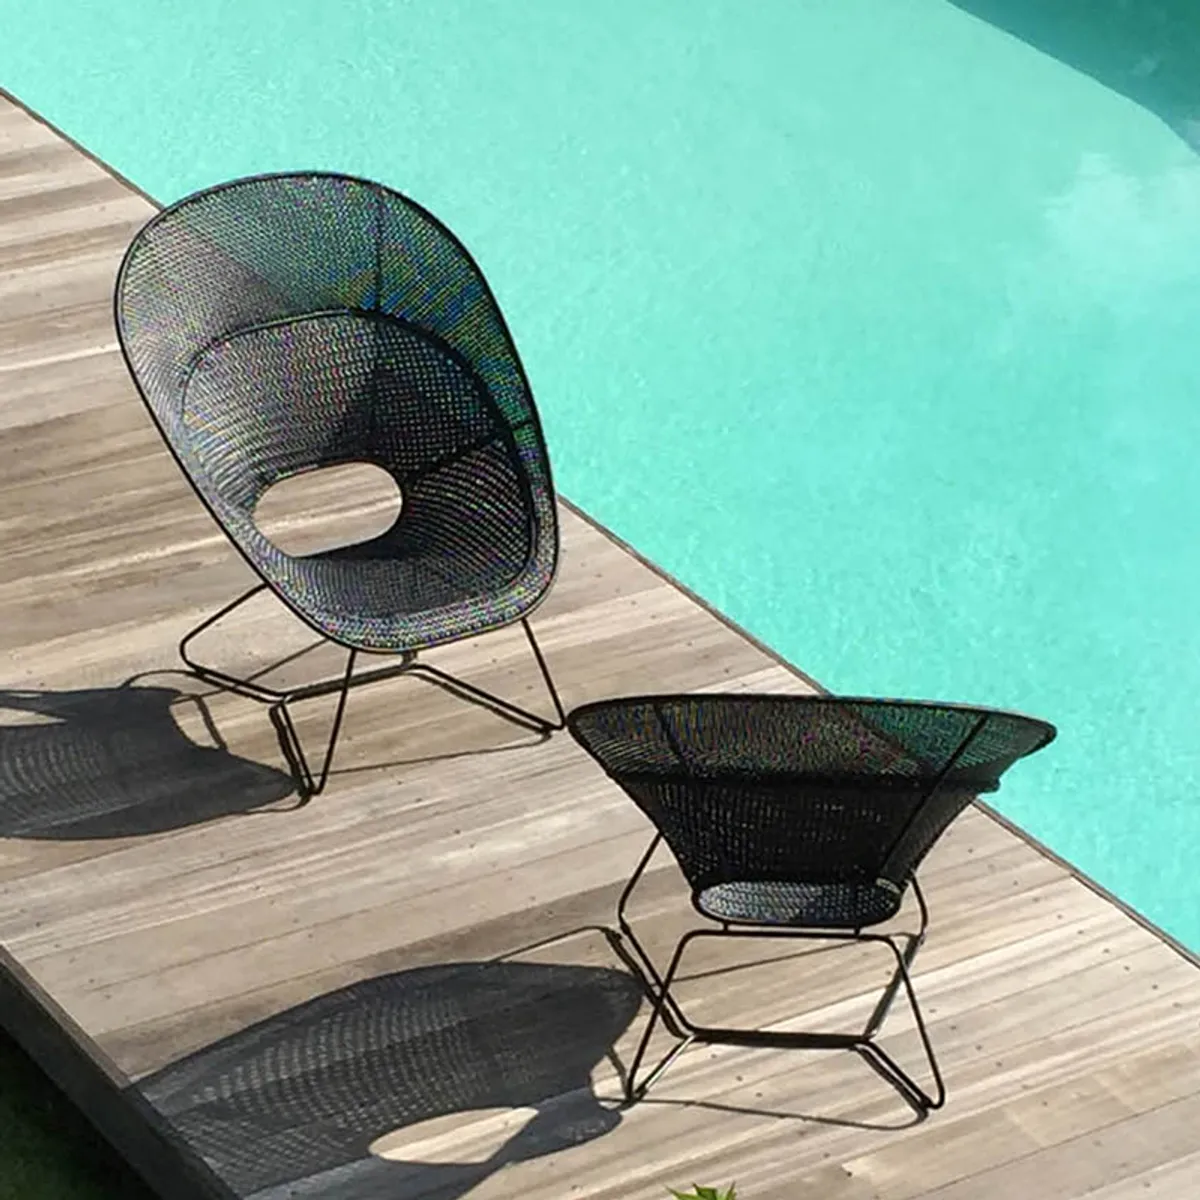 Trombone Outdoor Lounge Chair Black Rattan Furniture For Hotels And Poolside Cafes 013